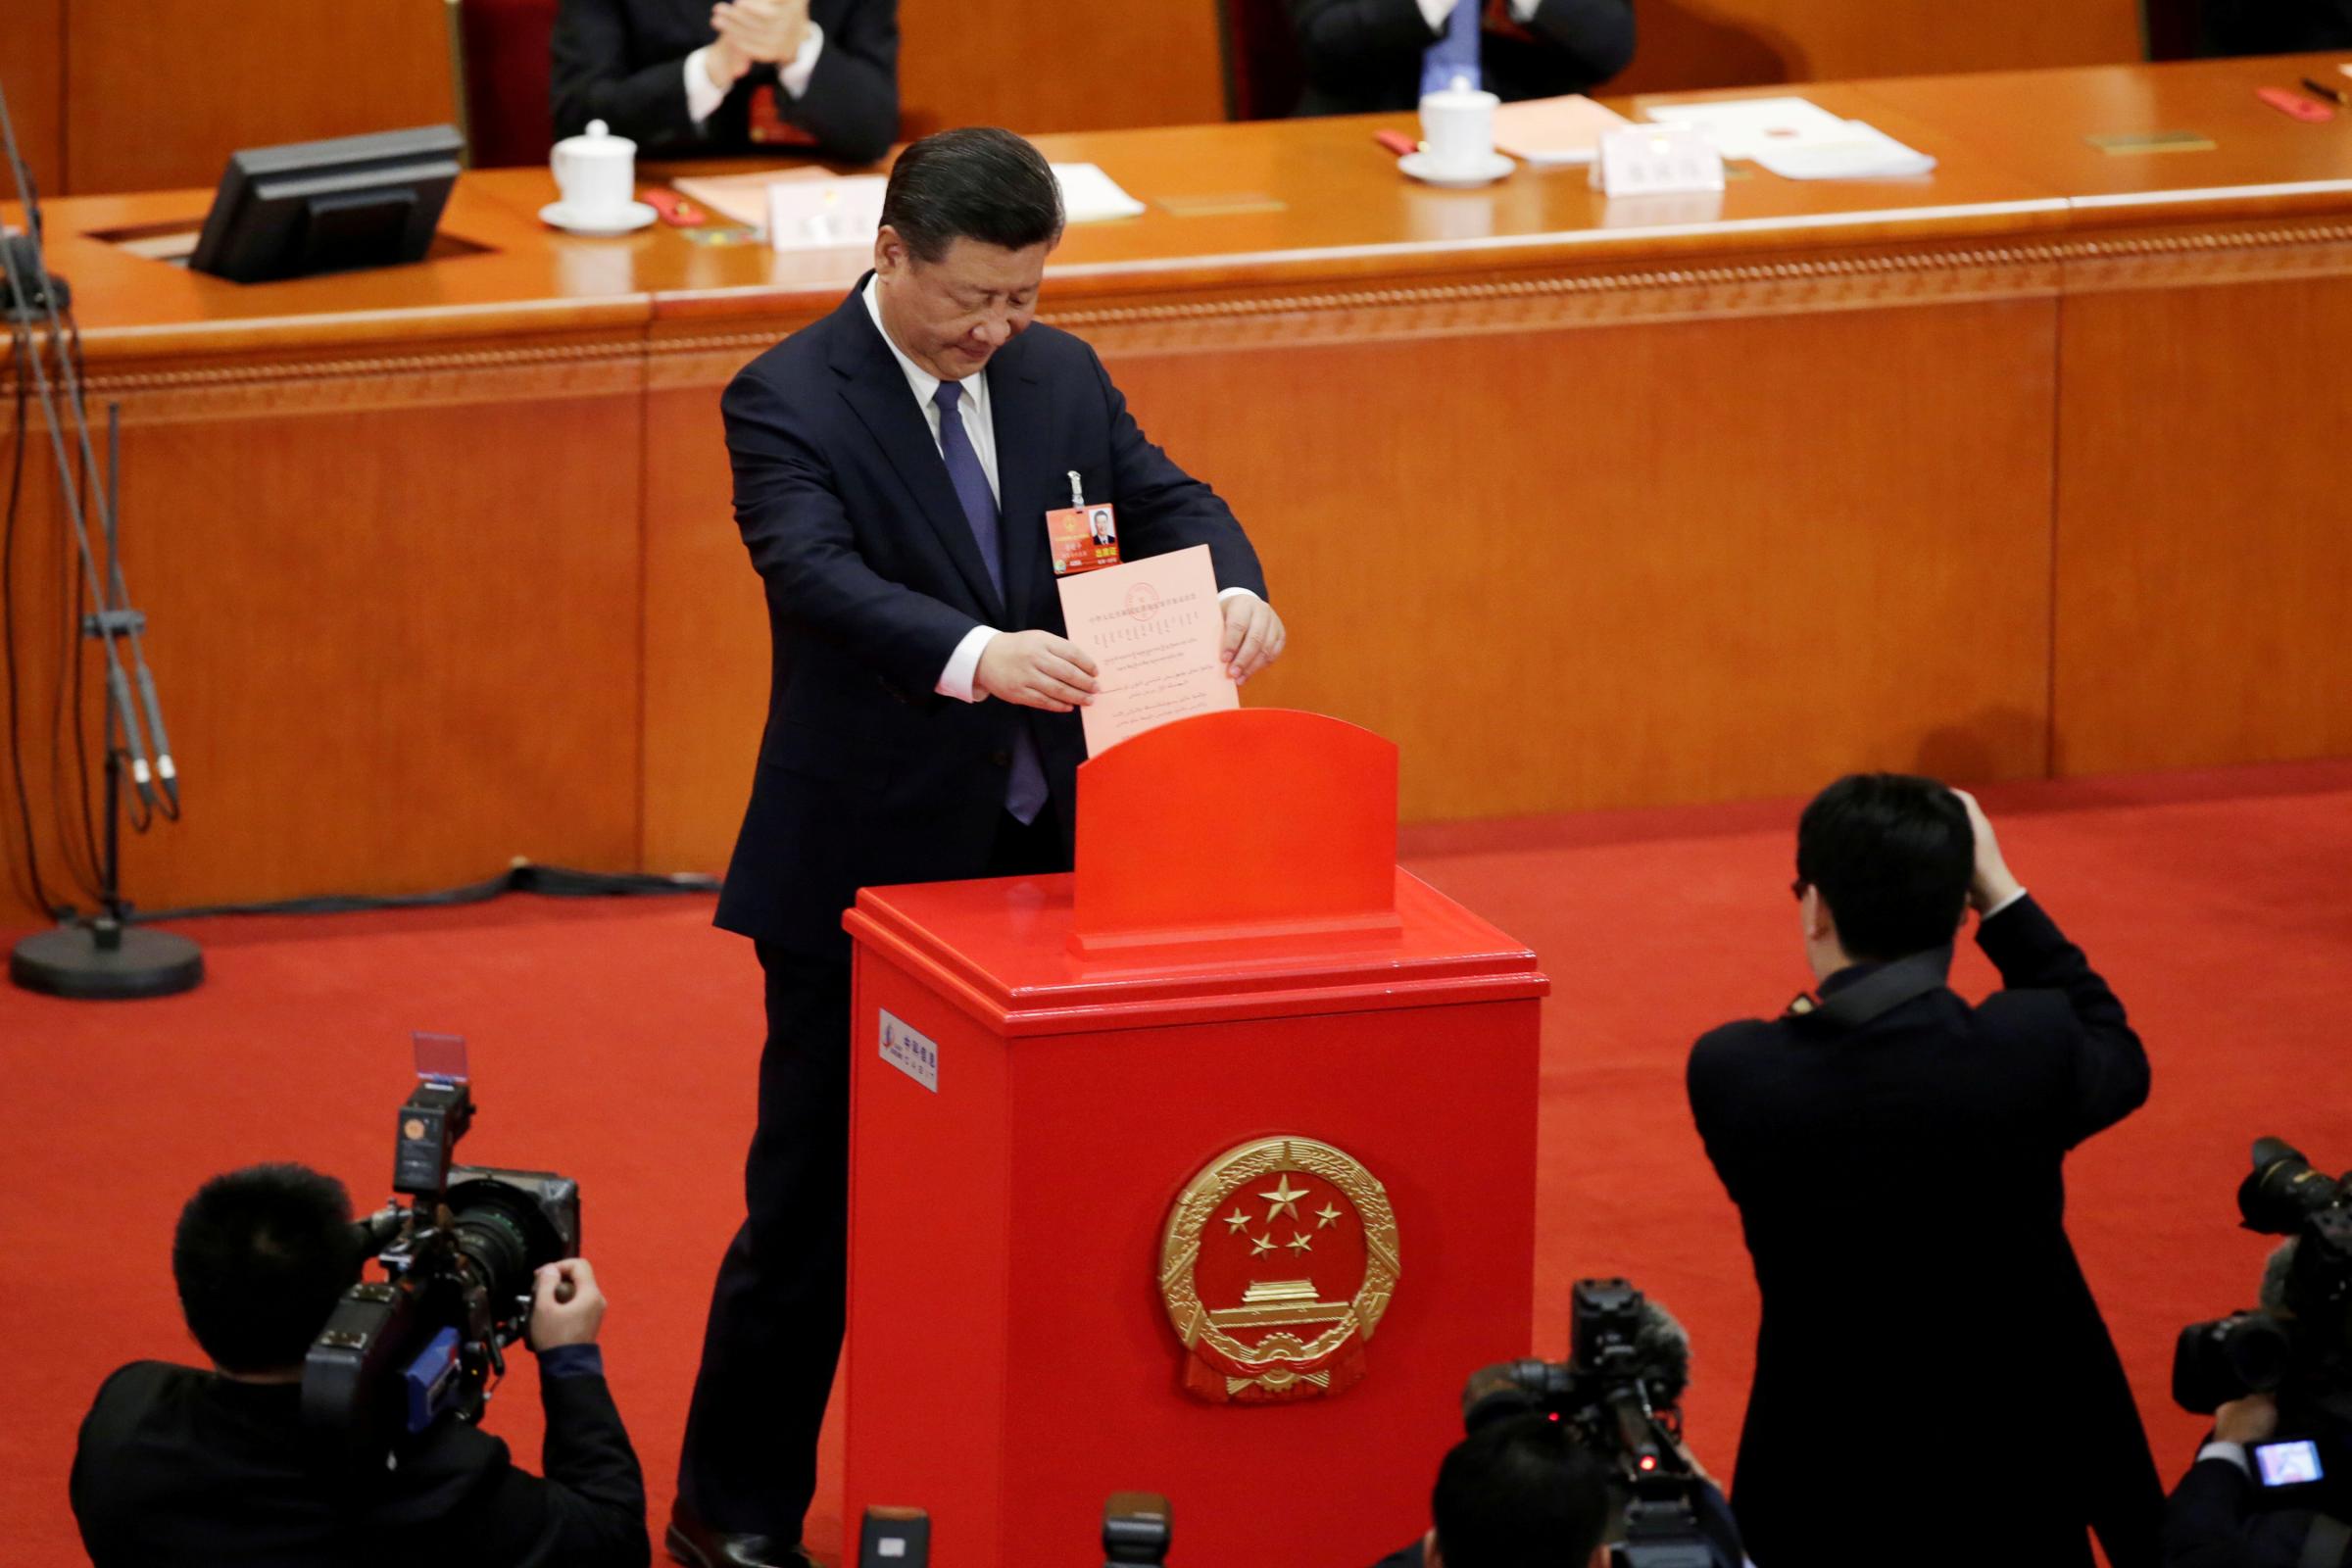 Chinese President Xi Jinping drops his ballot at the third plenary session of the National People's Congress (NPC) at the Great Hall of the People in Beijing